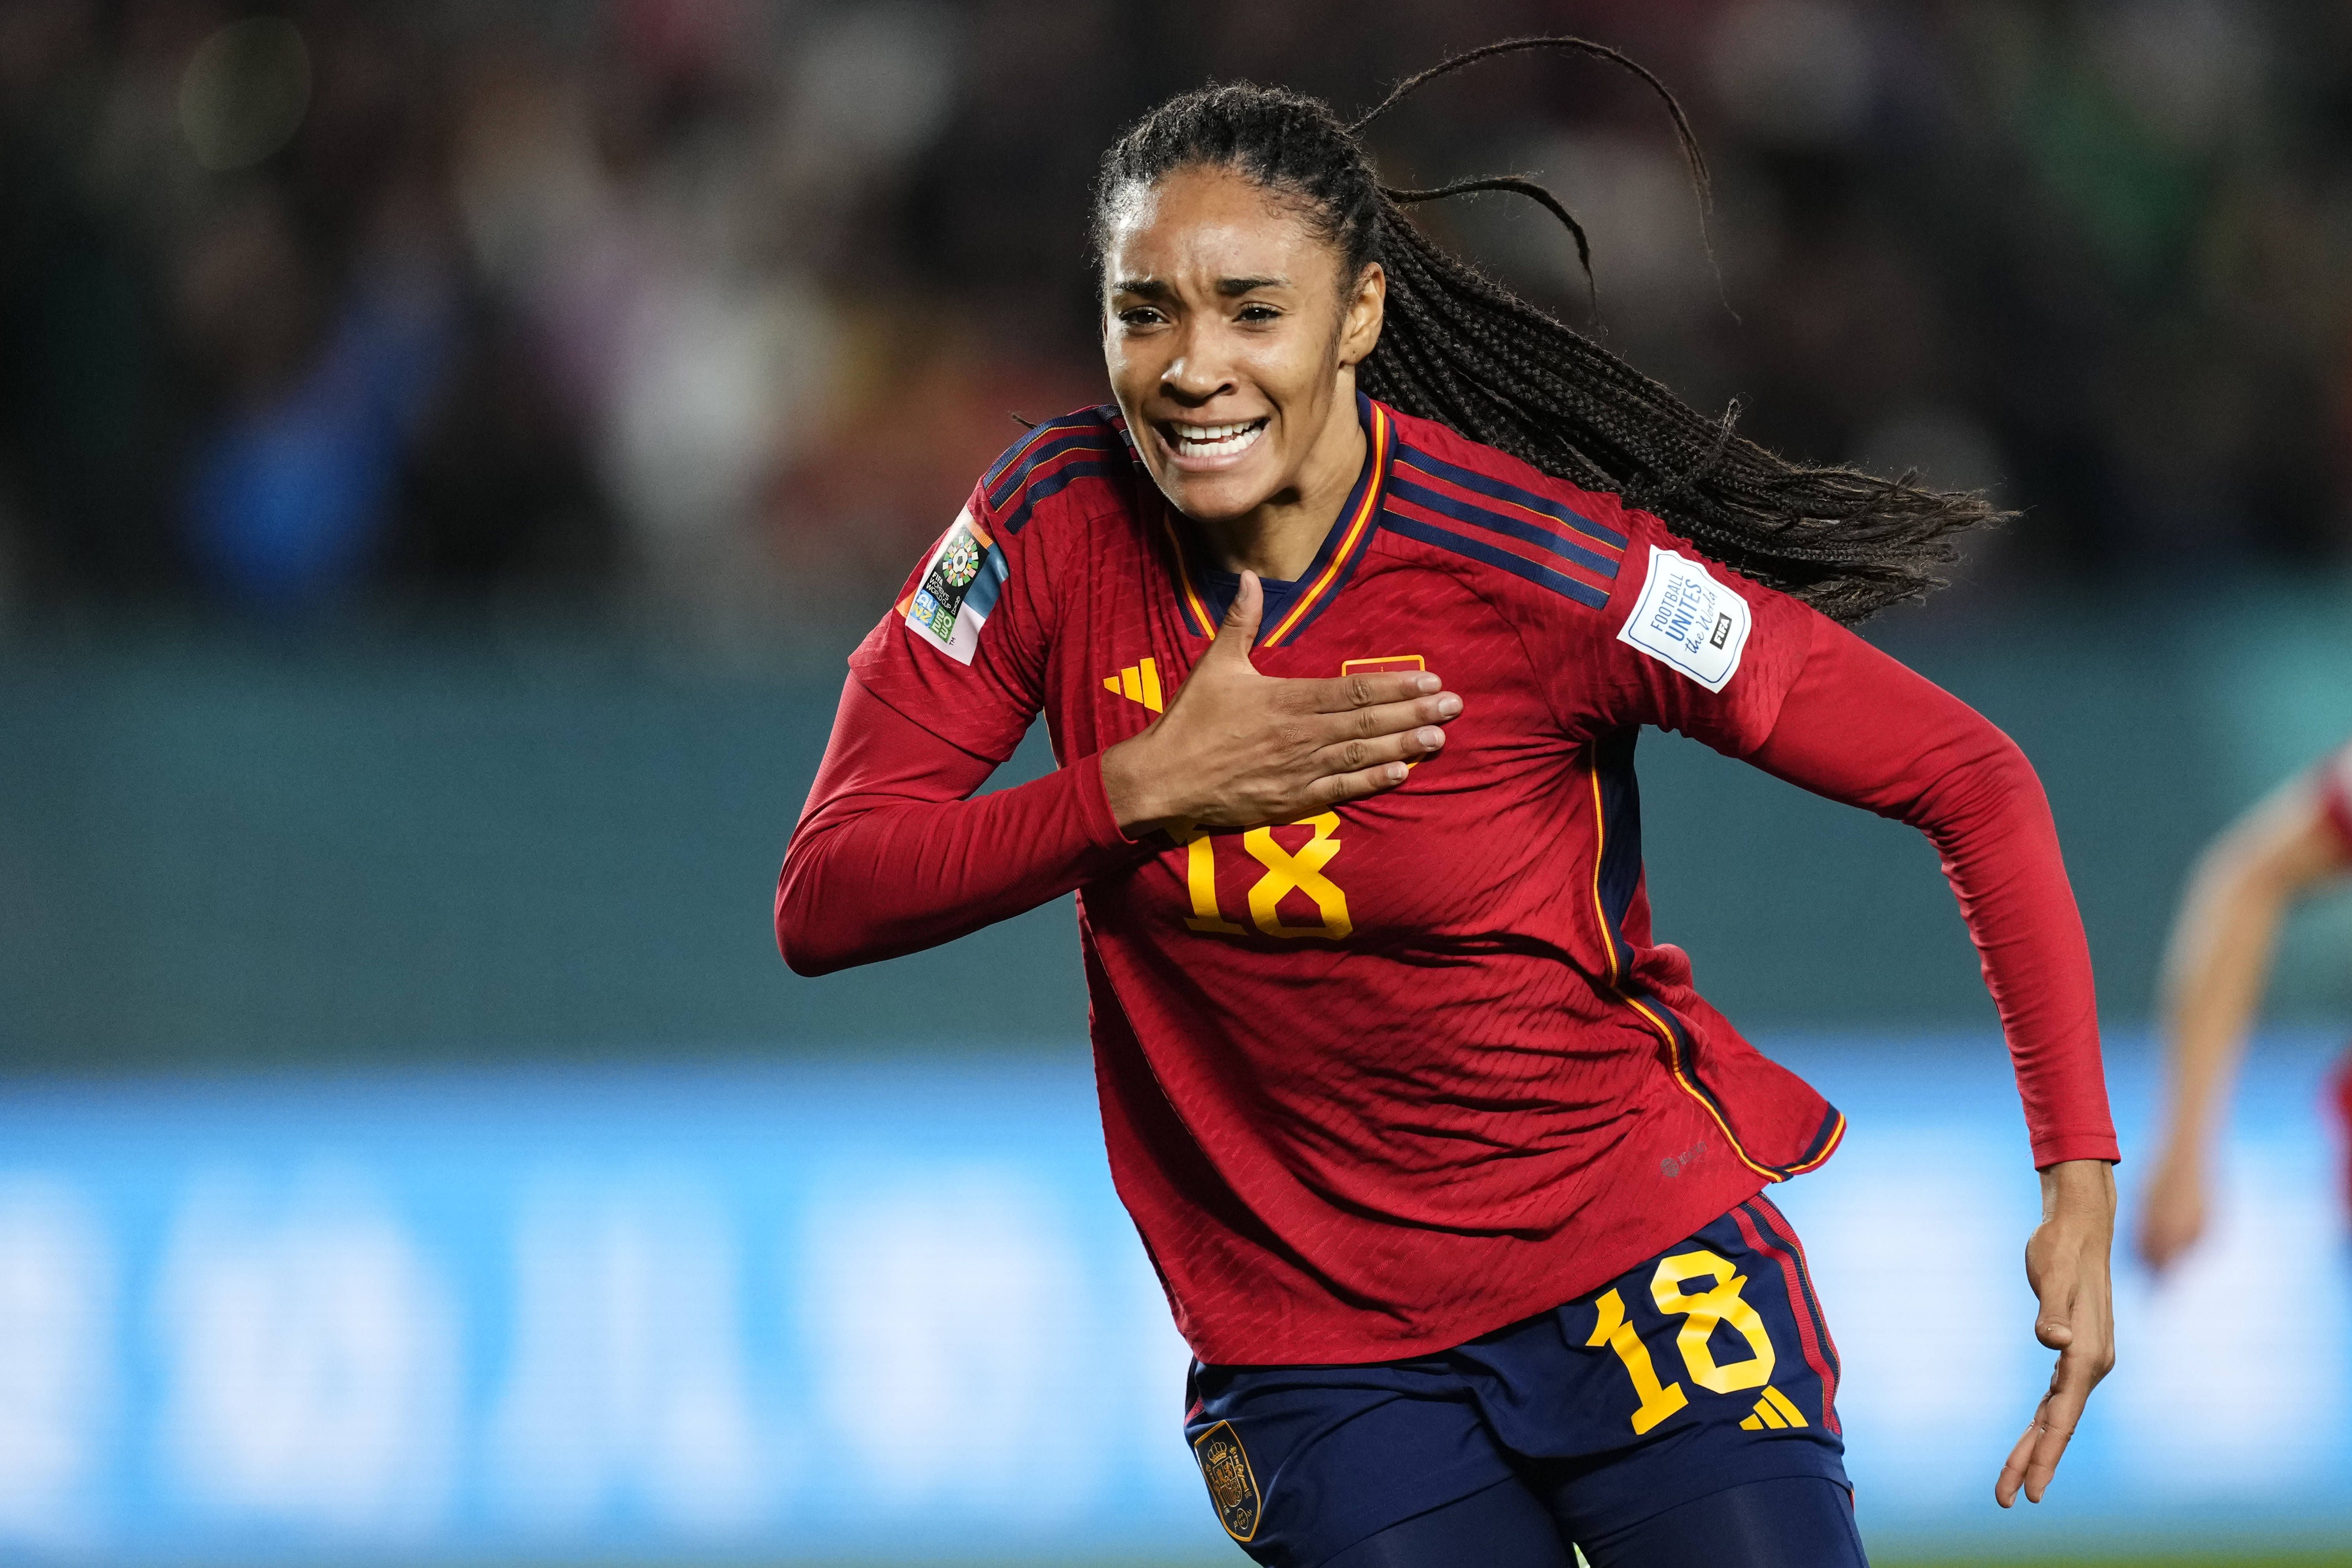 Salma Paralluelo 5 things to know about Spains most beautiful player at the World